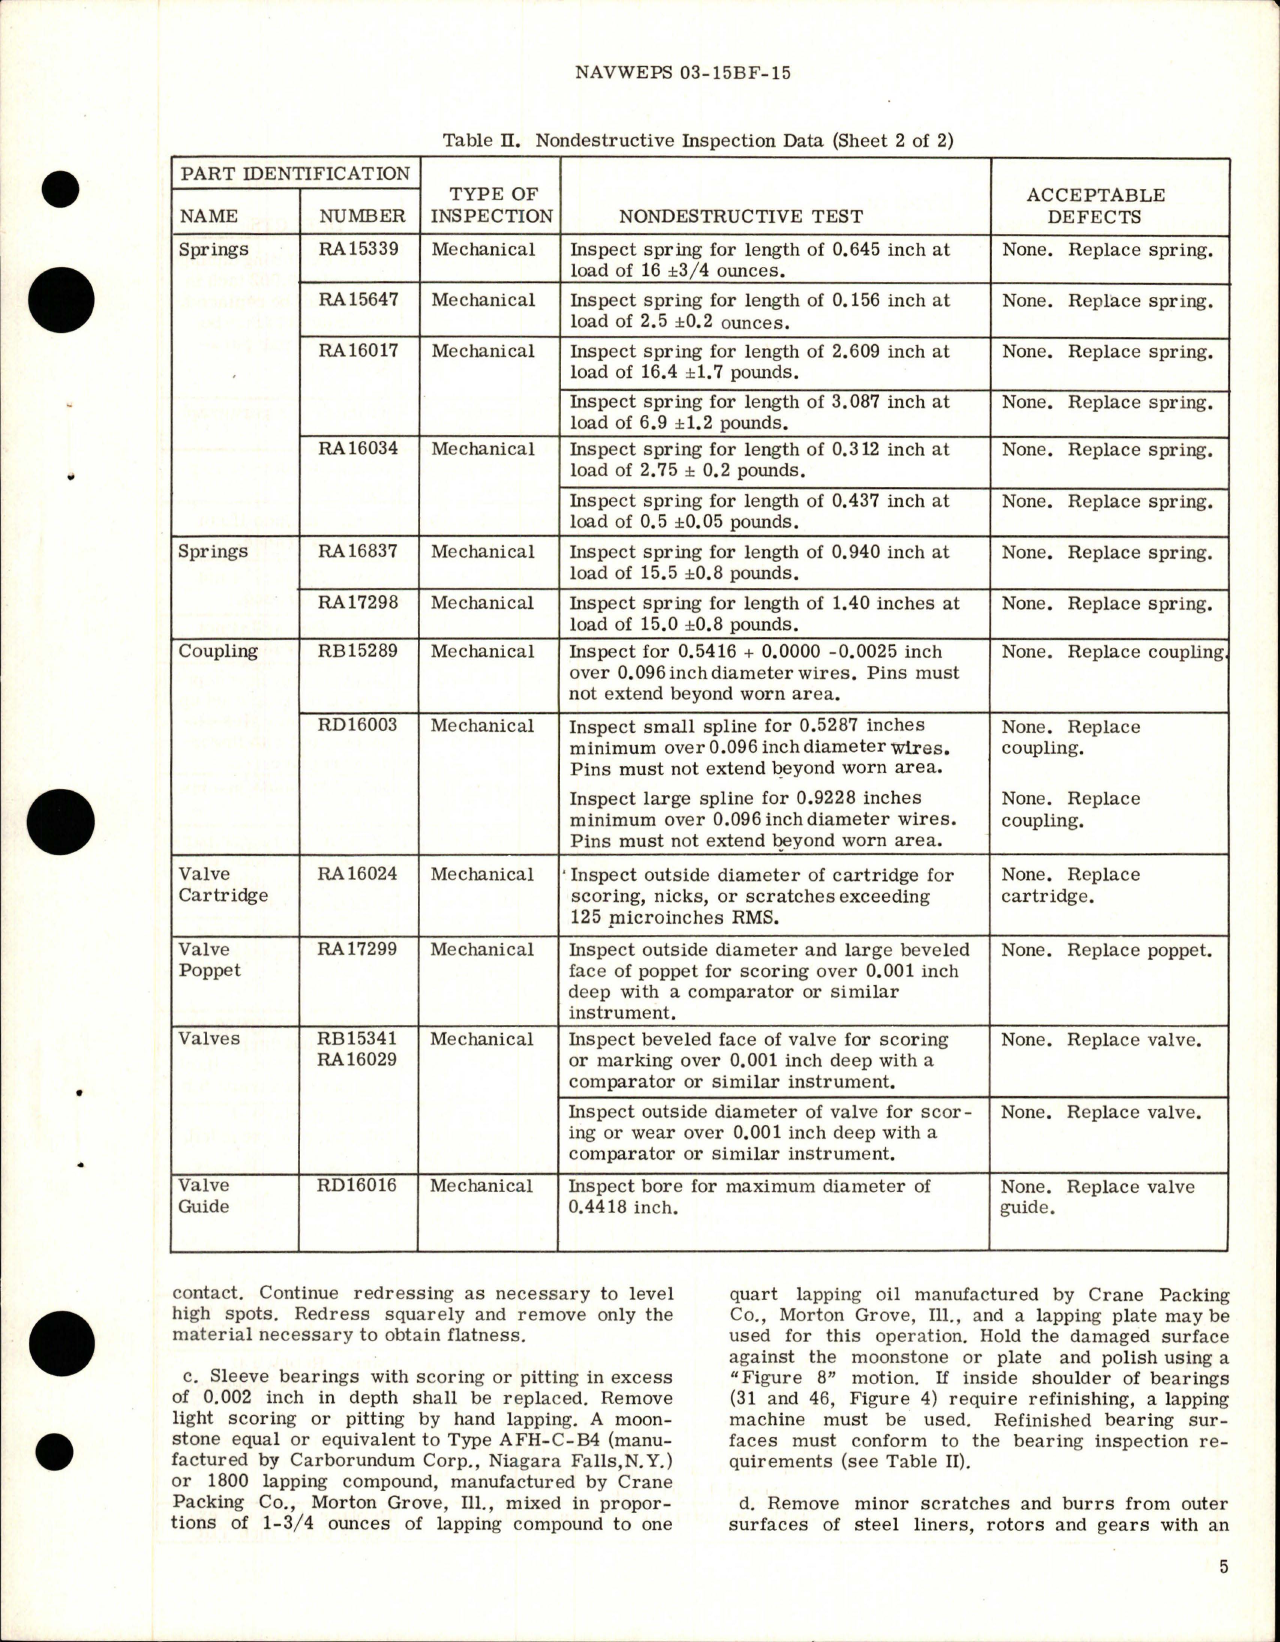 Sample page 7 from AirCorps Library document: Overhaul Instructions with Illustrated Parts for Lube Oil and Hydraulic Pump - Model RR16000B and RR16000C